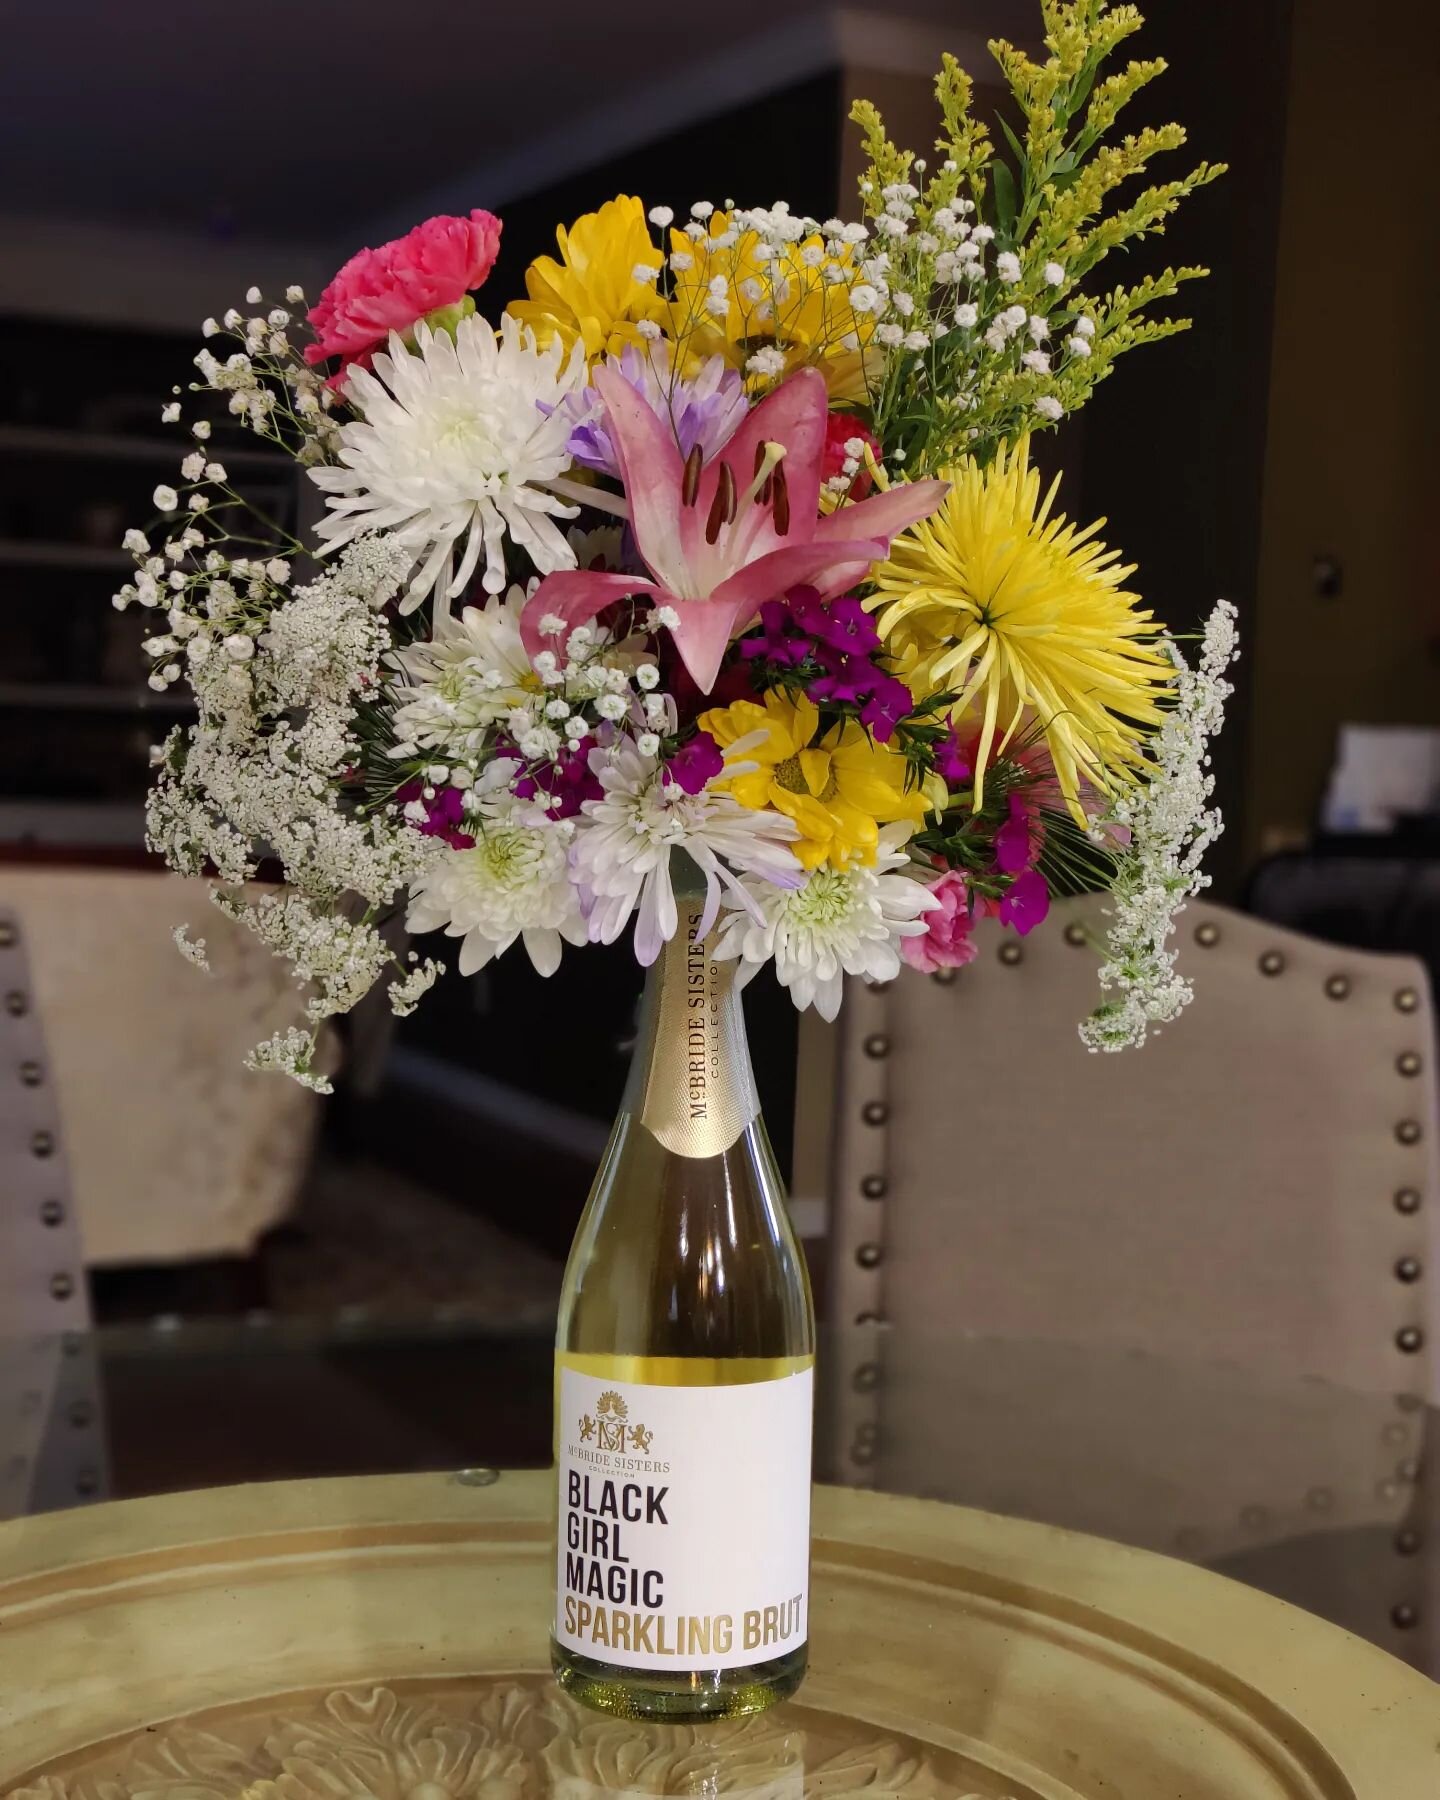 Happy Mothers Day!
From, The Nixologist 
.
Ask us about our Champagne flower bouquet!